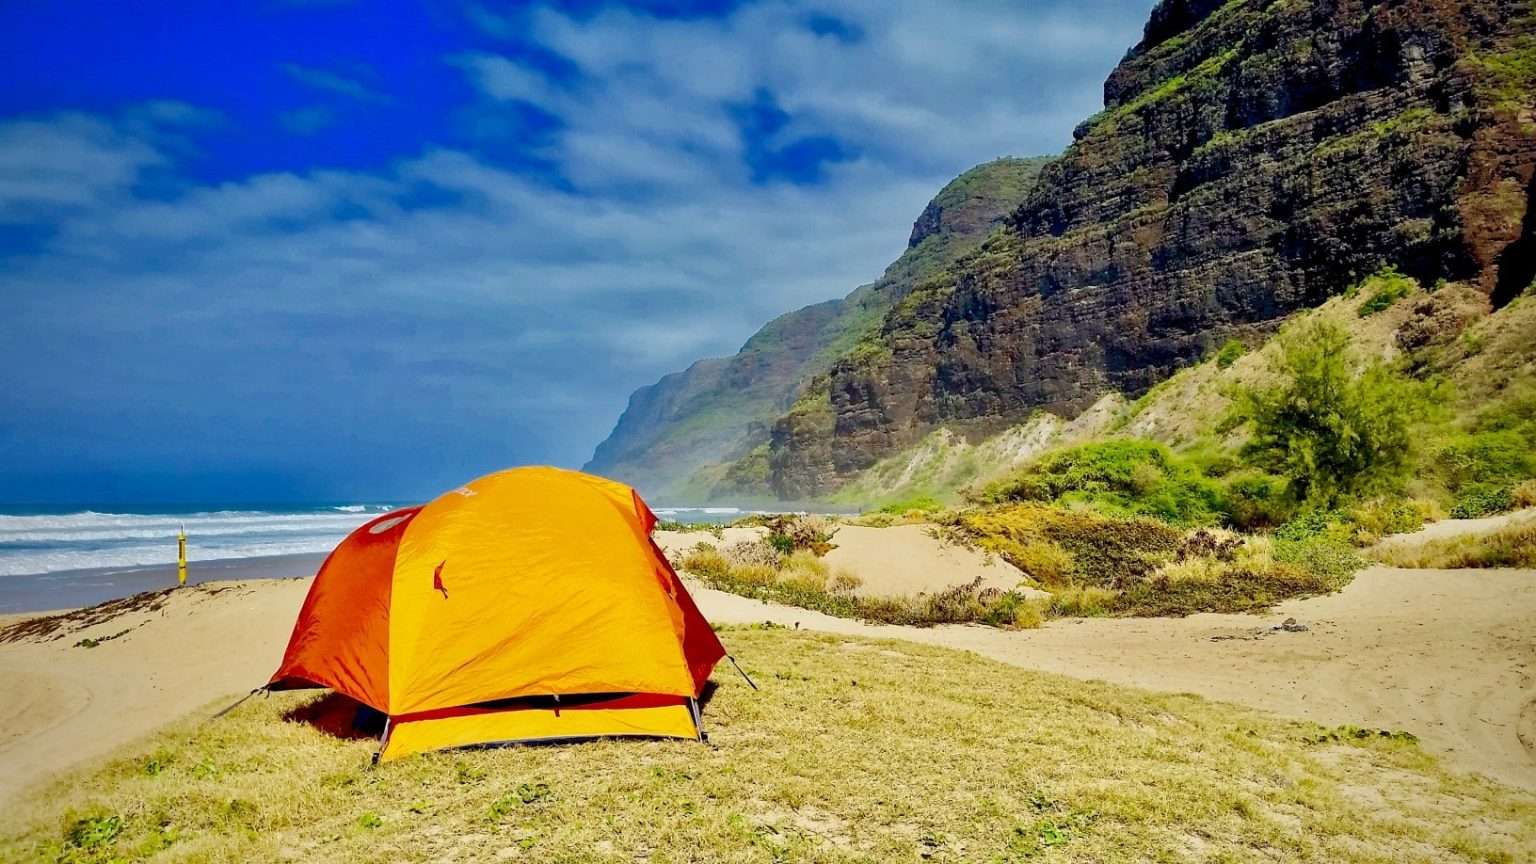 15 Spots For Beach Camping In The USA